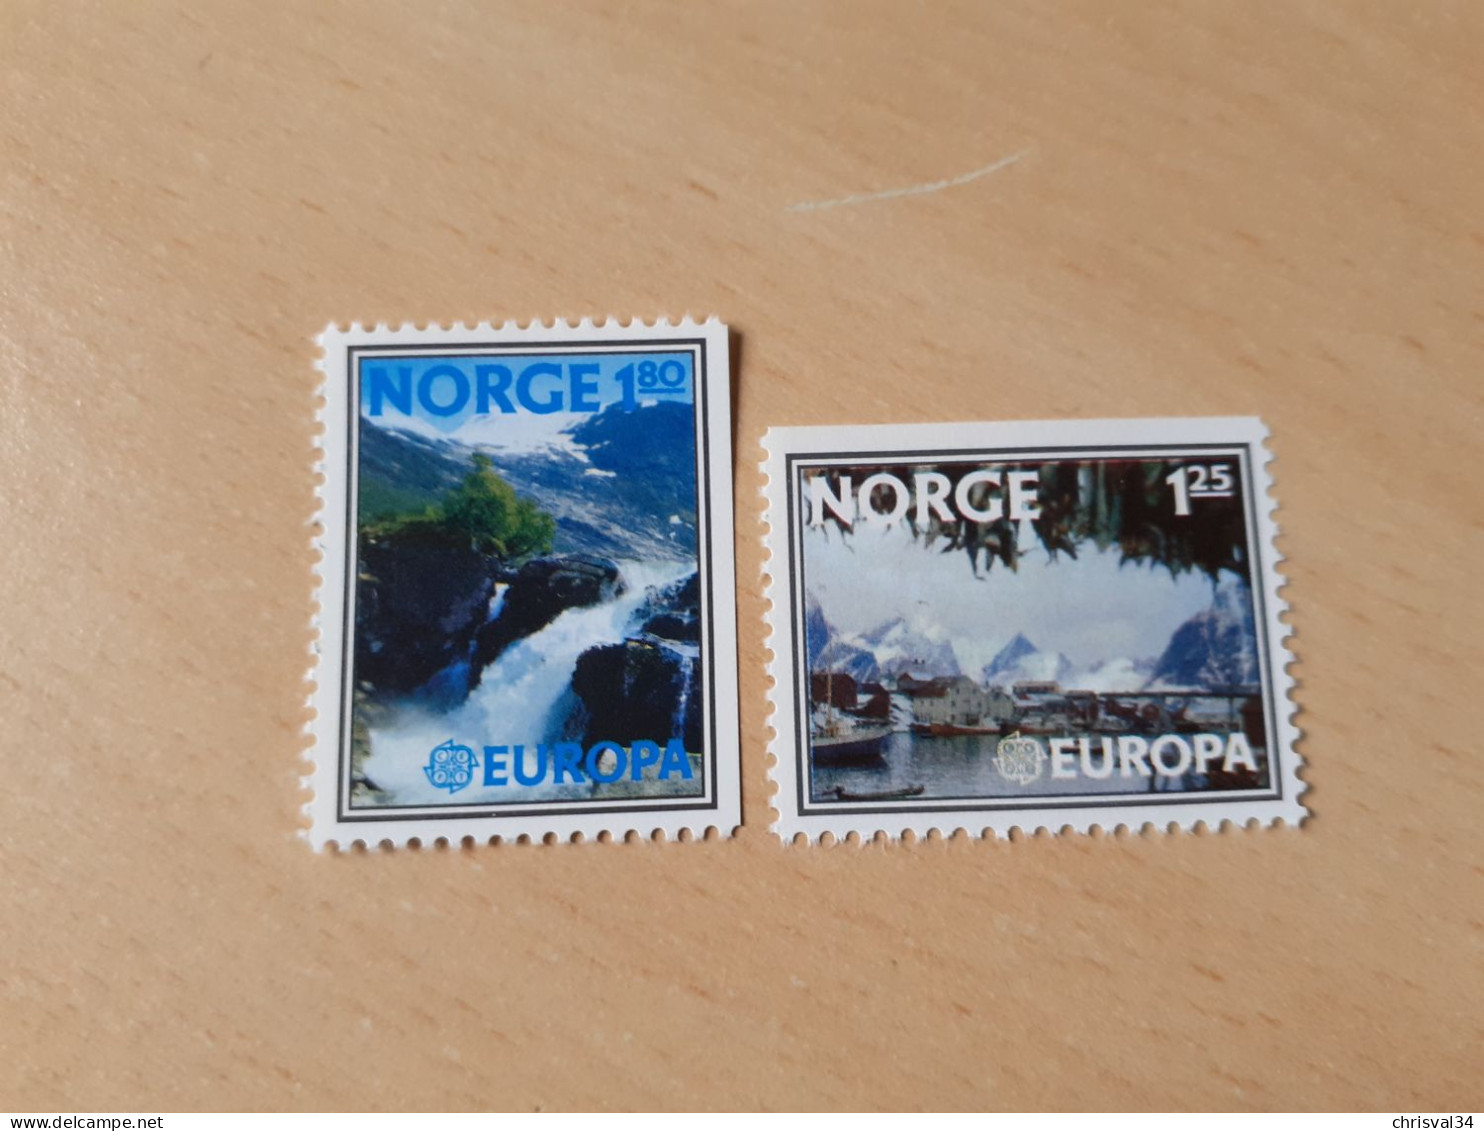 TIMBRES   NORVEGE   ANNEE    1977   N  698a  +  699a   COTE  5,50  EUROS   NEUFS  LUXE** - Nuovi